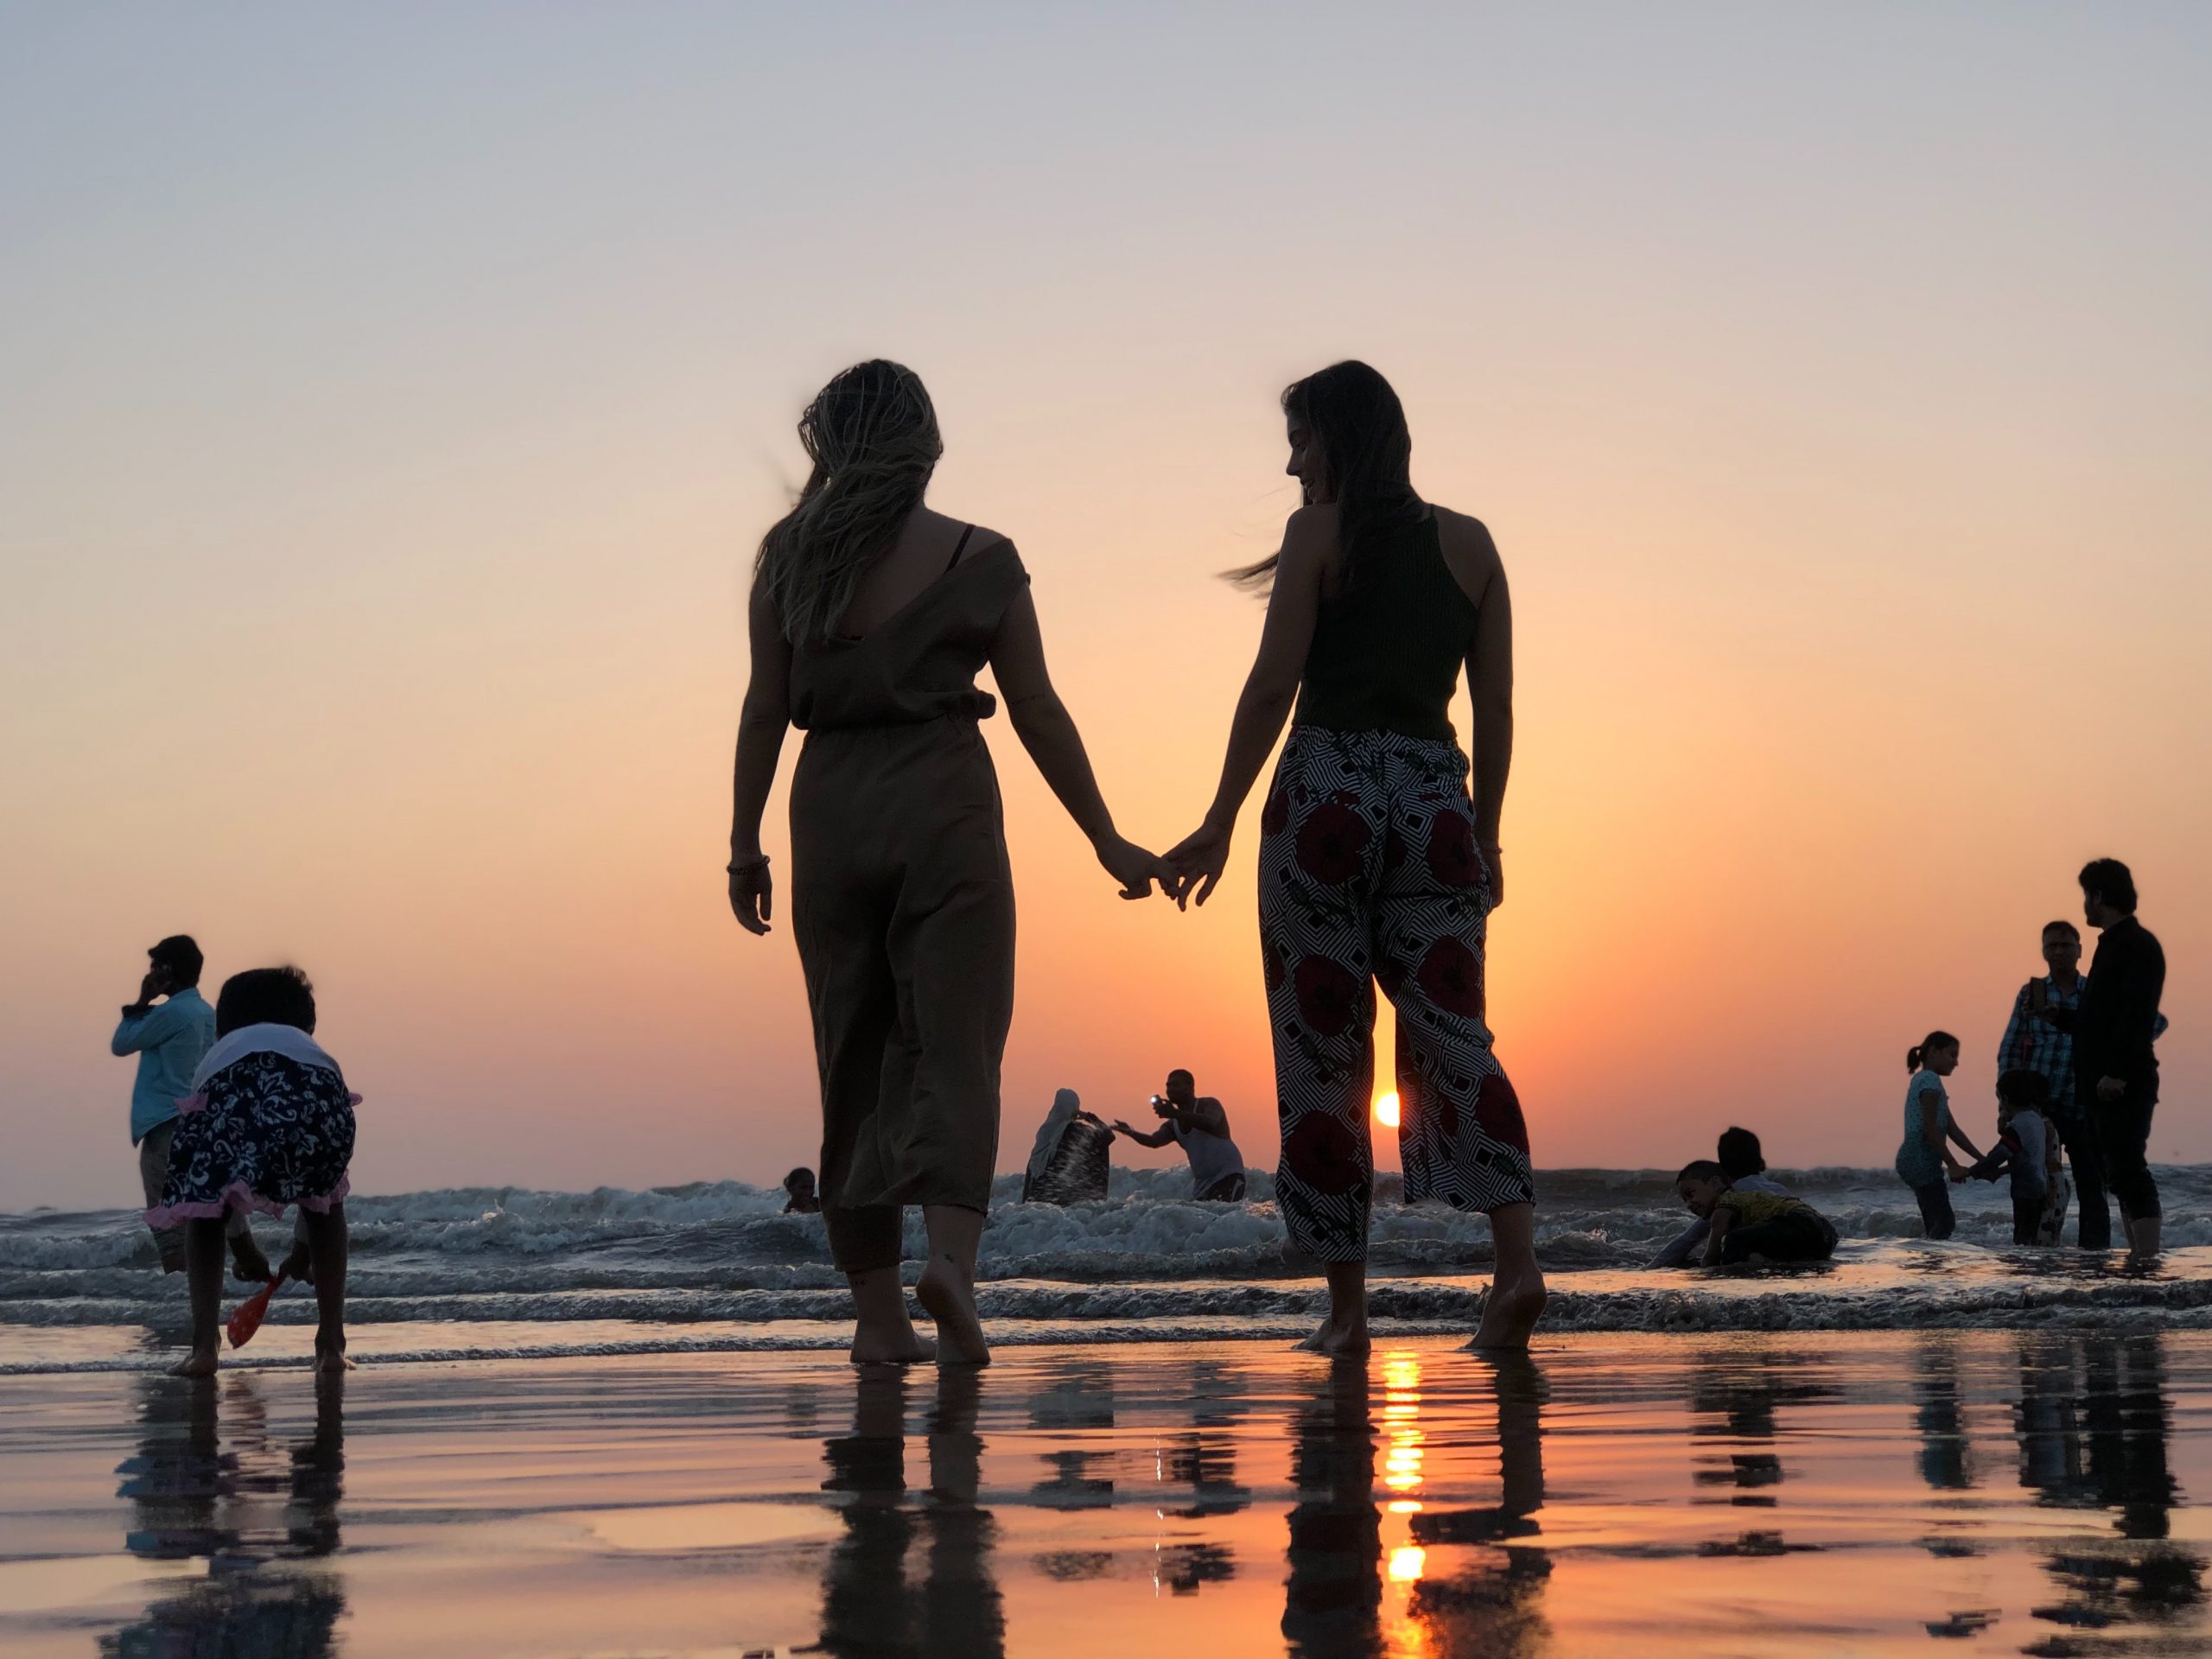 Two women holding hands in front of the sunset